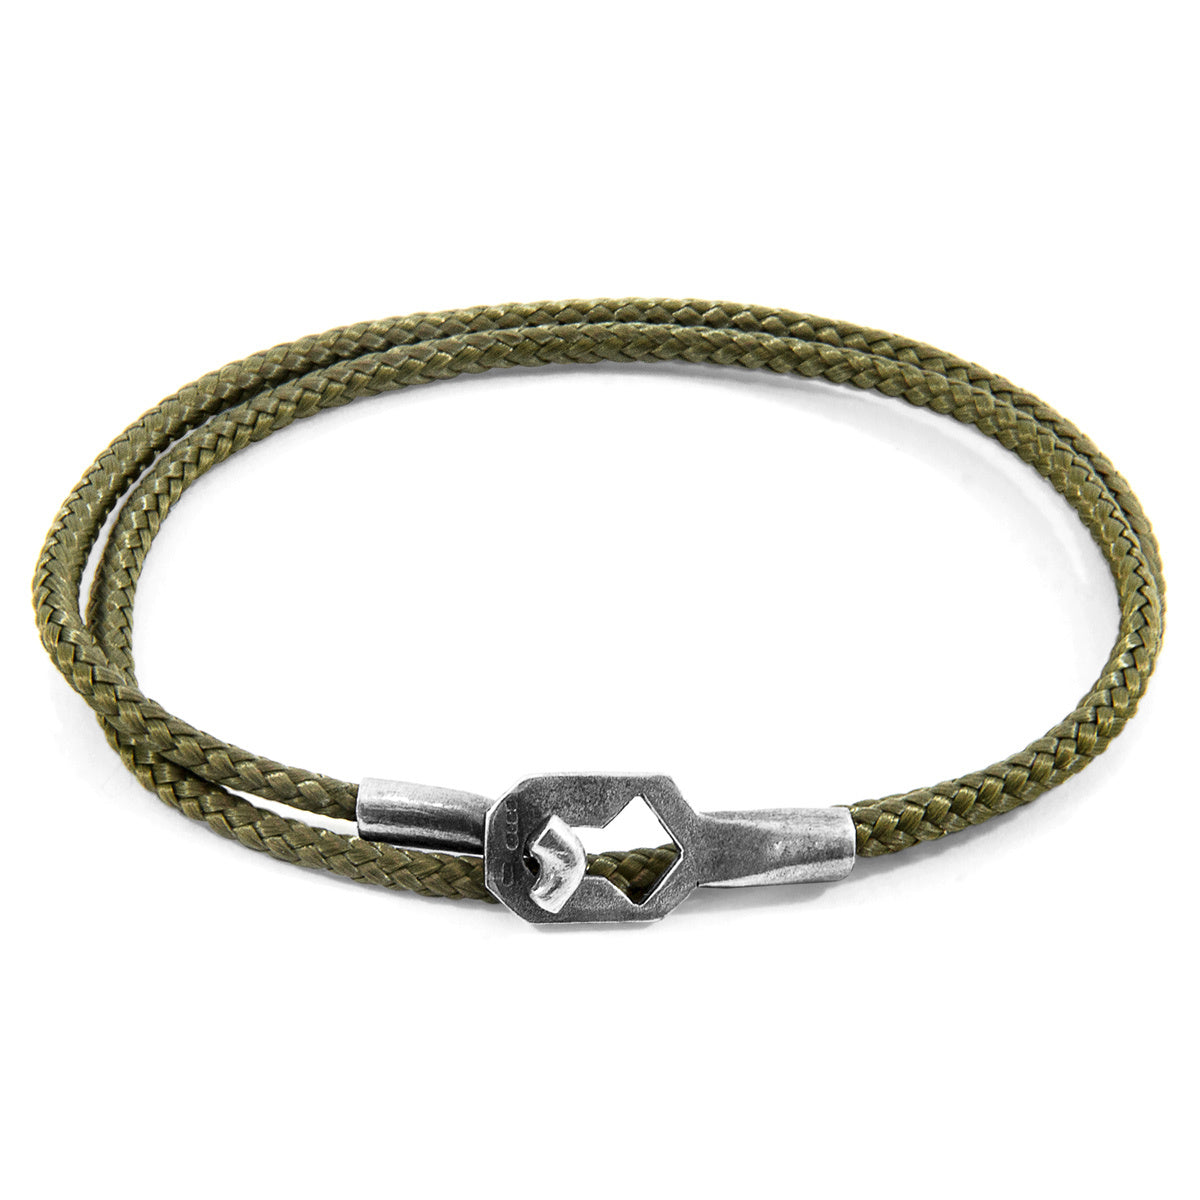 Khaki Green Tenby Silver and Rope Bracelet - Handcrafted in Great Britain with Marine Grade Polyester and Sterling Silver Clasp - Jewelry & Watches - Bijou Her -  -  - 